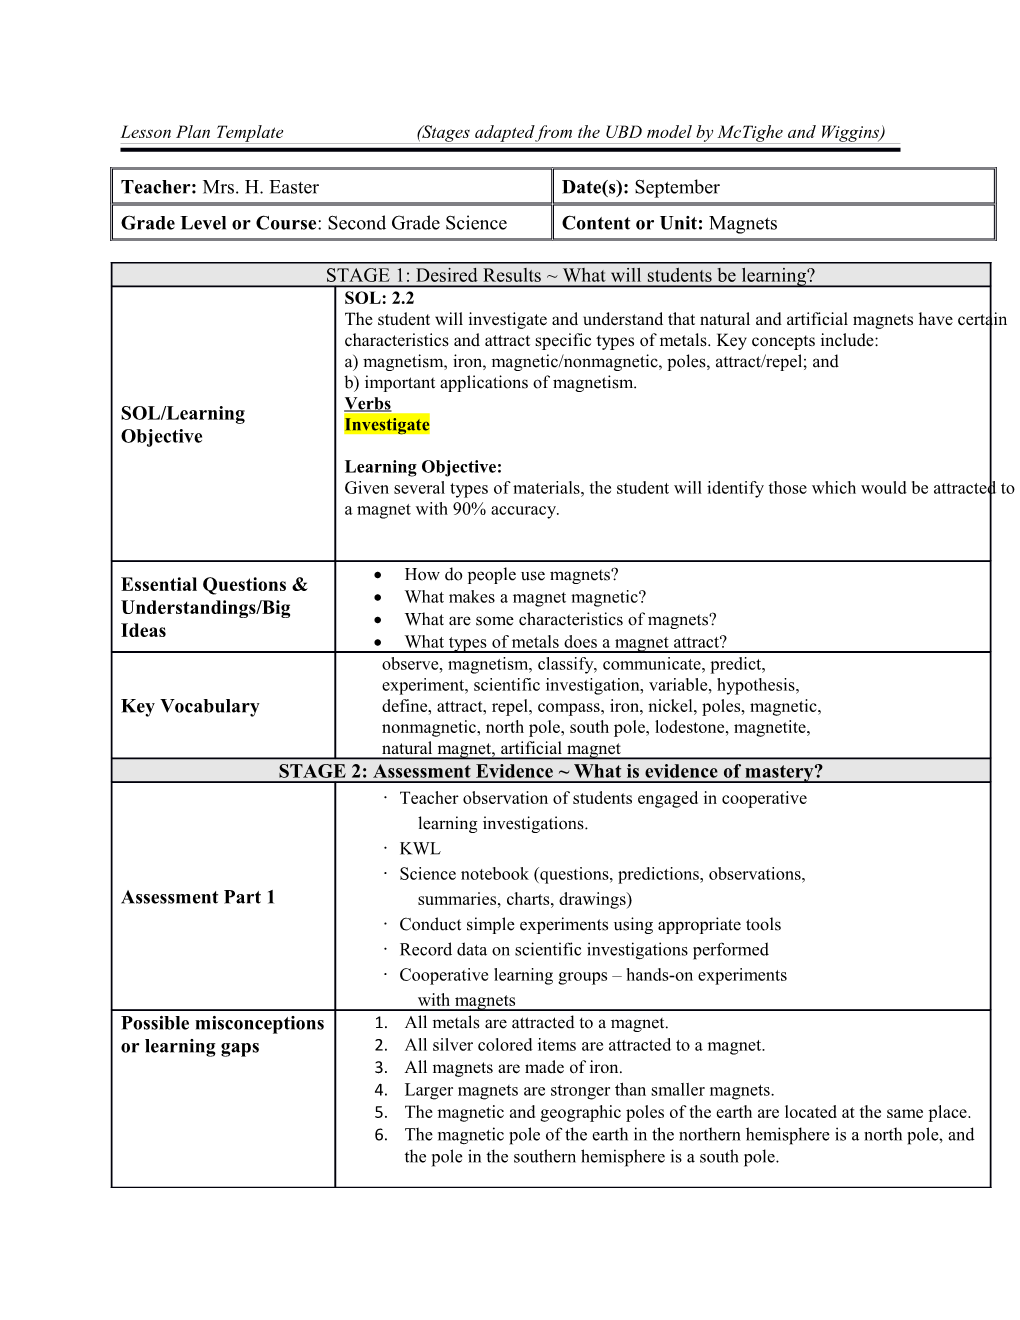 Lesson Plan Template (Stages Adapted from the UBD Model by Mctighe and Wiggins)